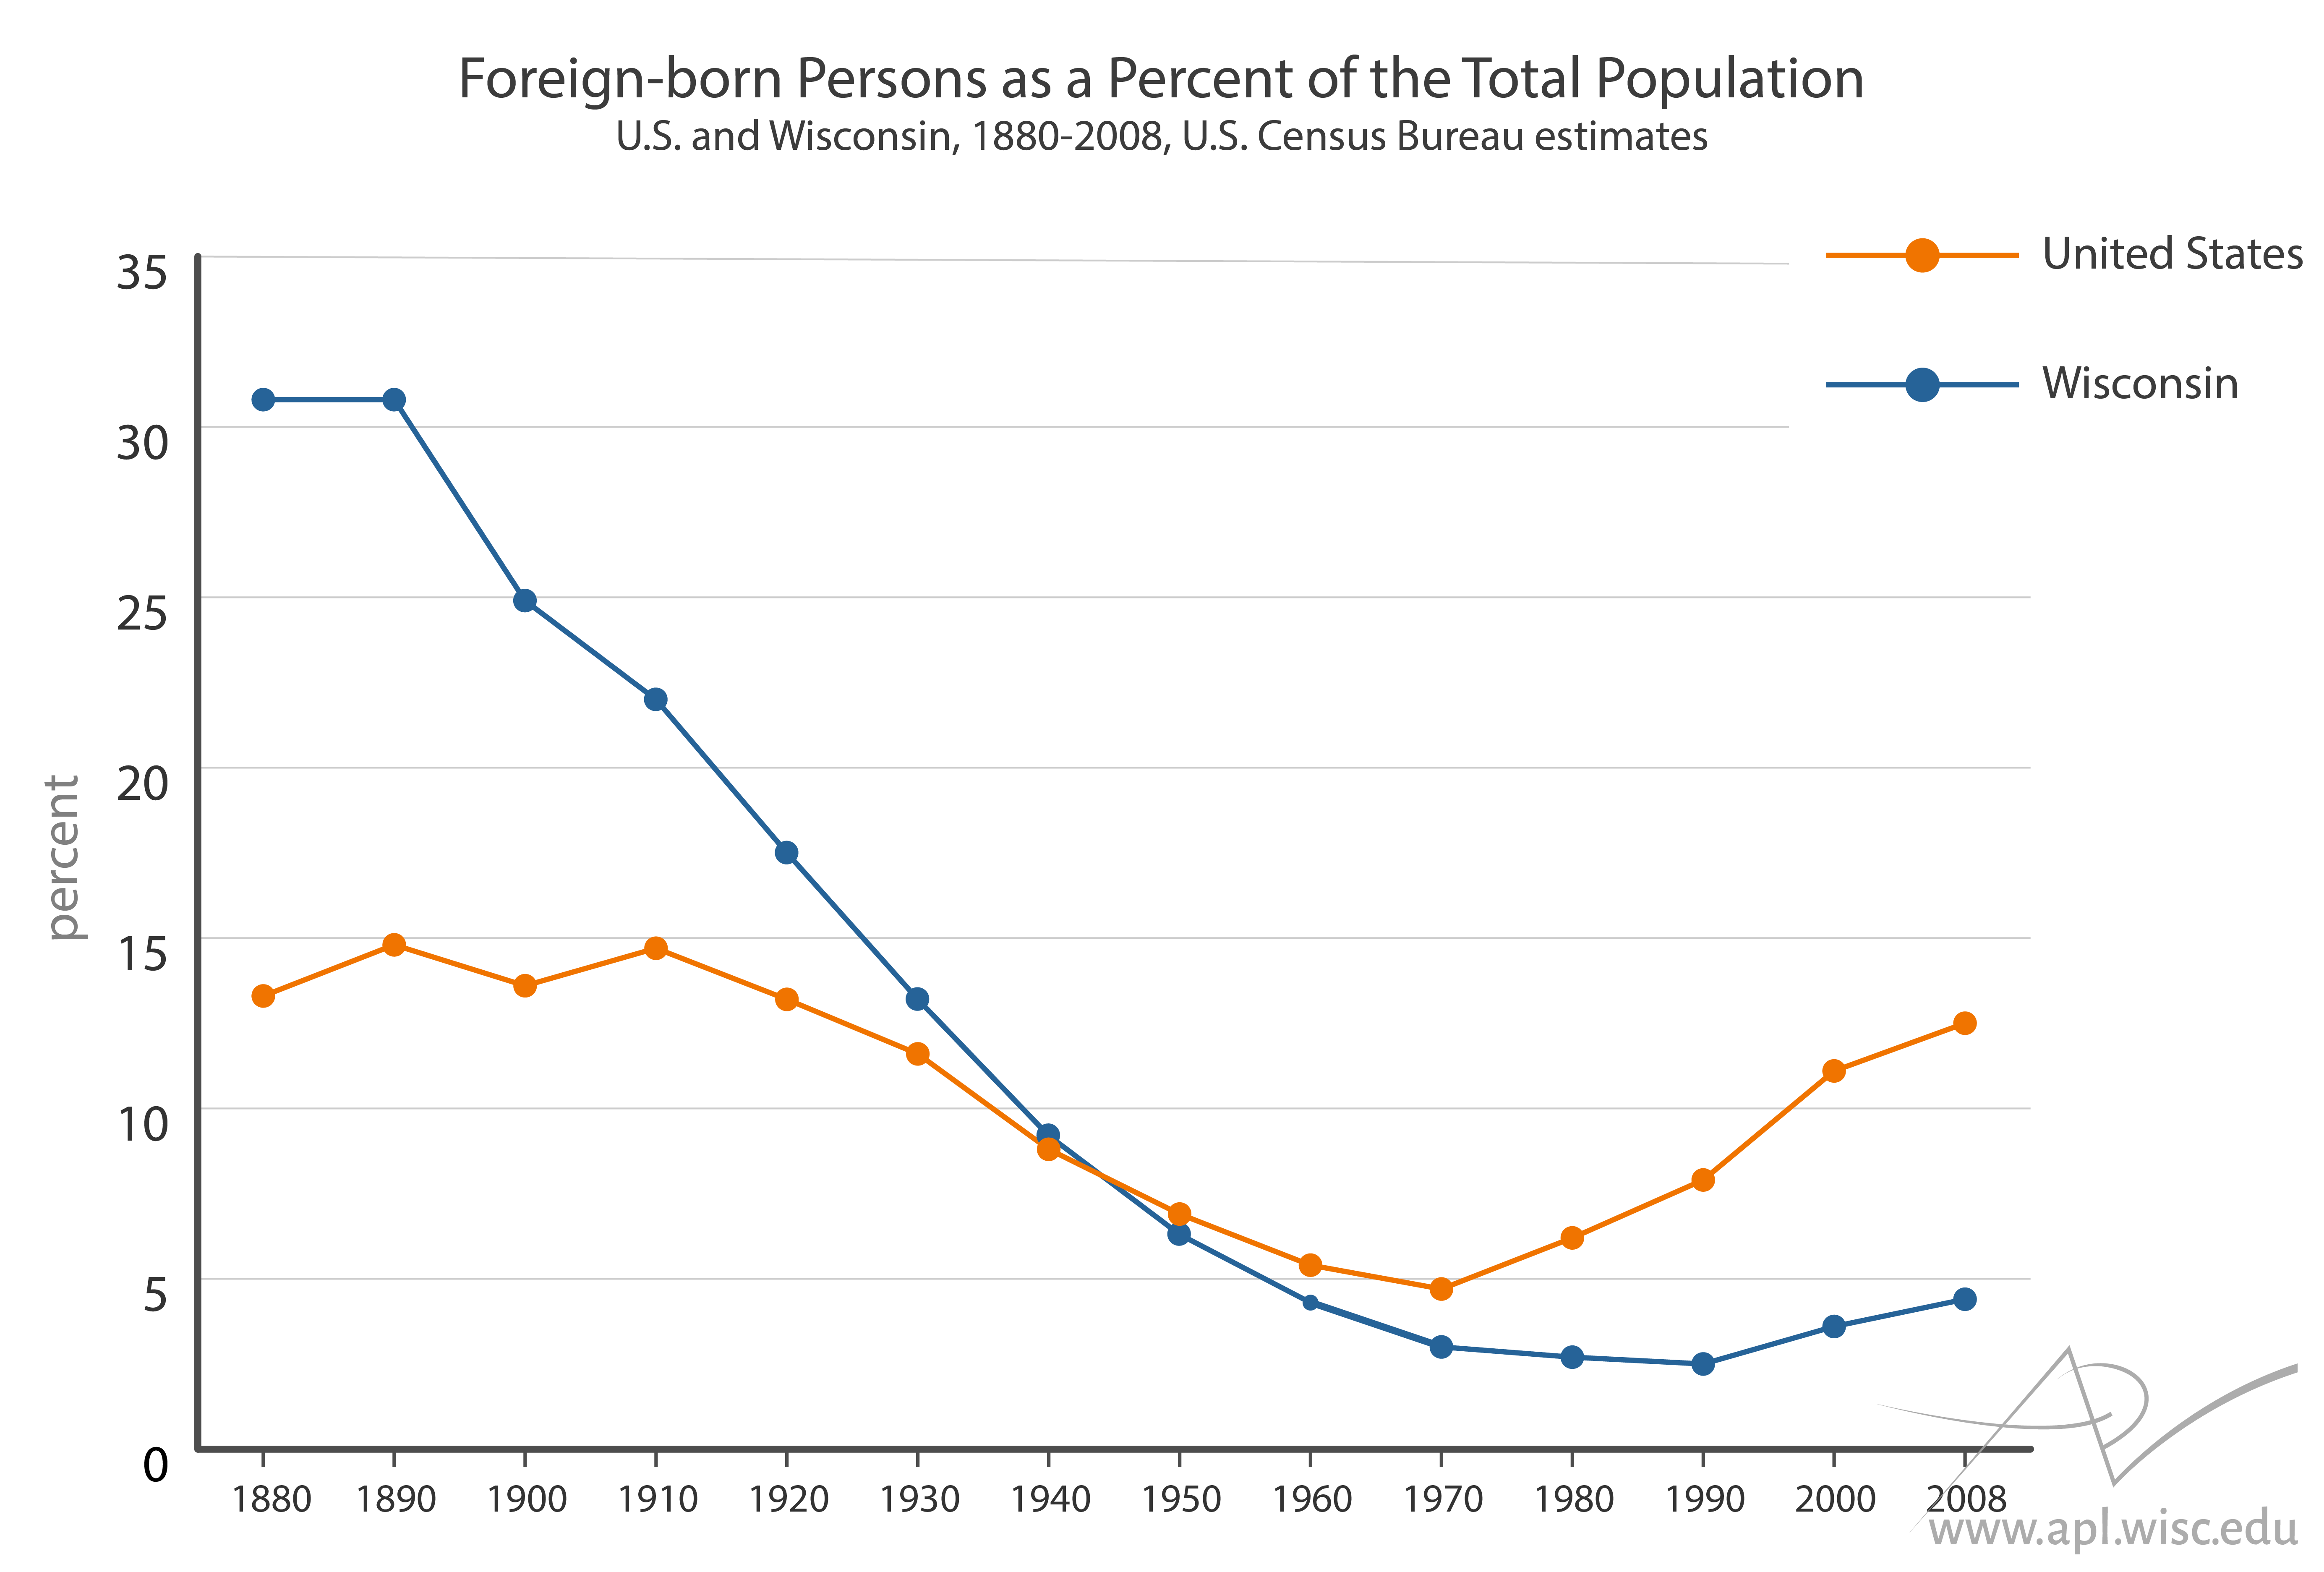 chart showing trend of percent foreign-born population in Wisconsin versus the United States as a whole